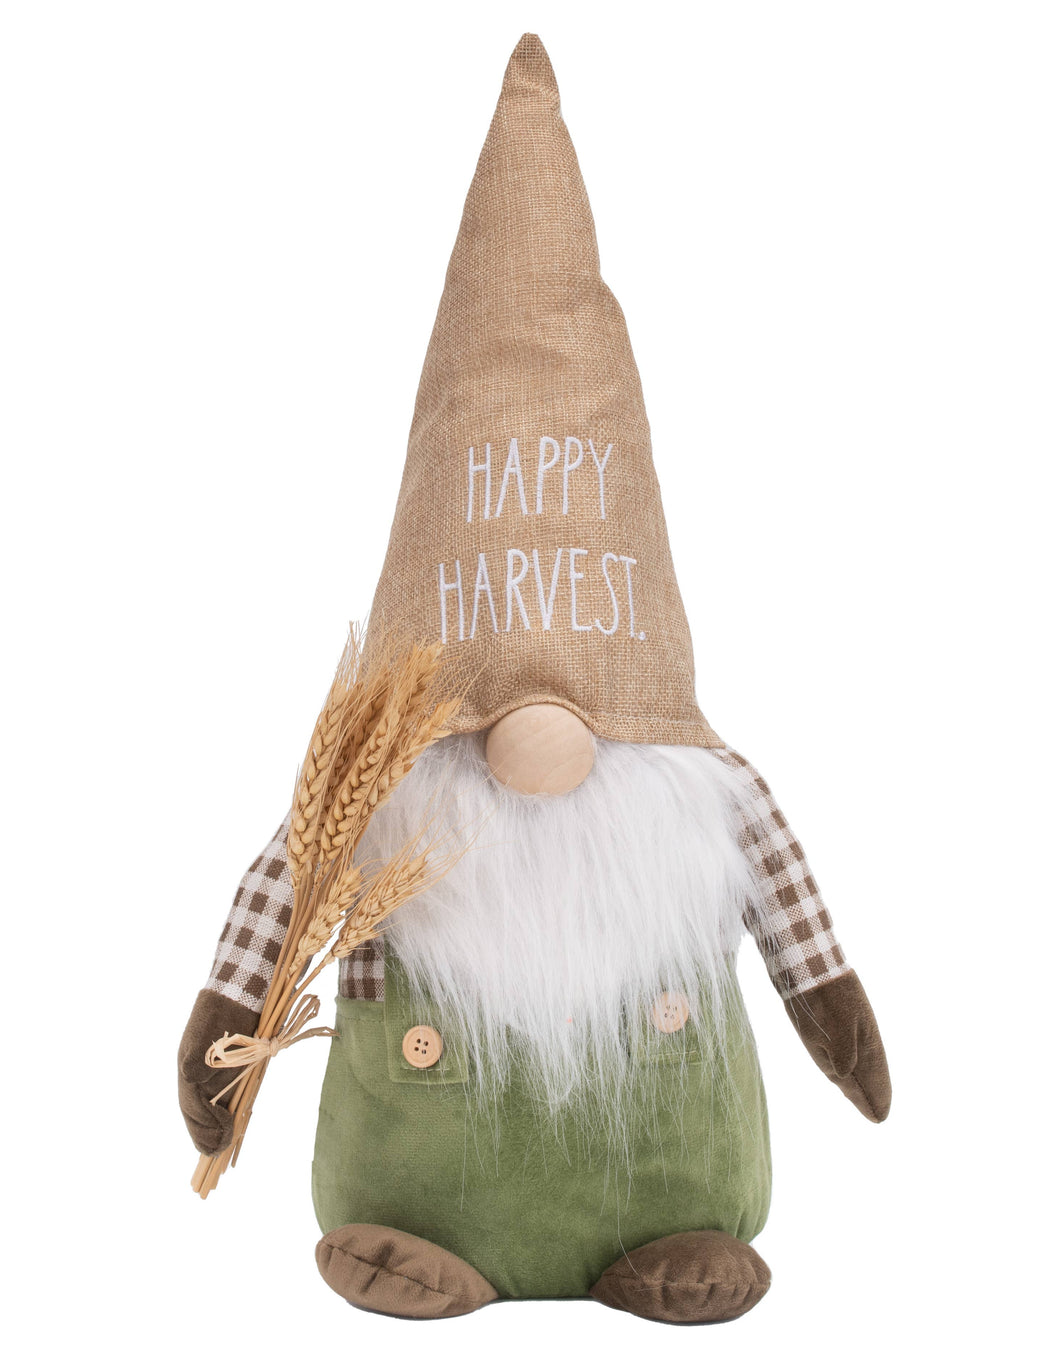 Rae Dunn “Happy Harvest” Fall Harvest Gnome with Wheat Stalk